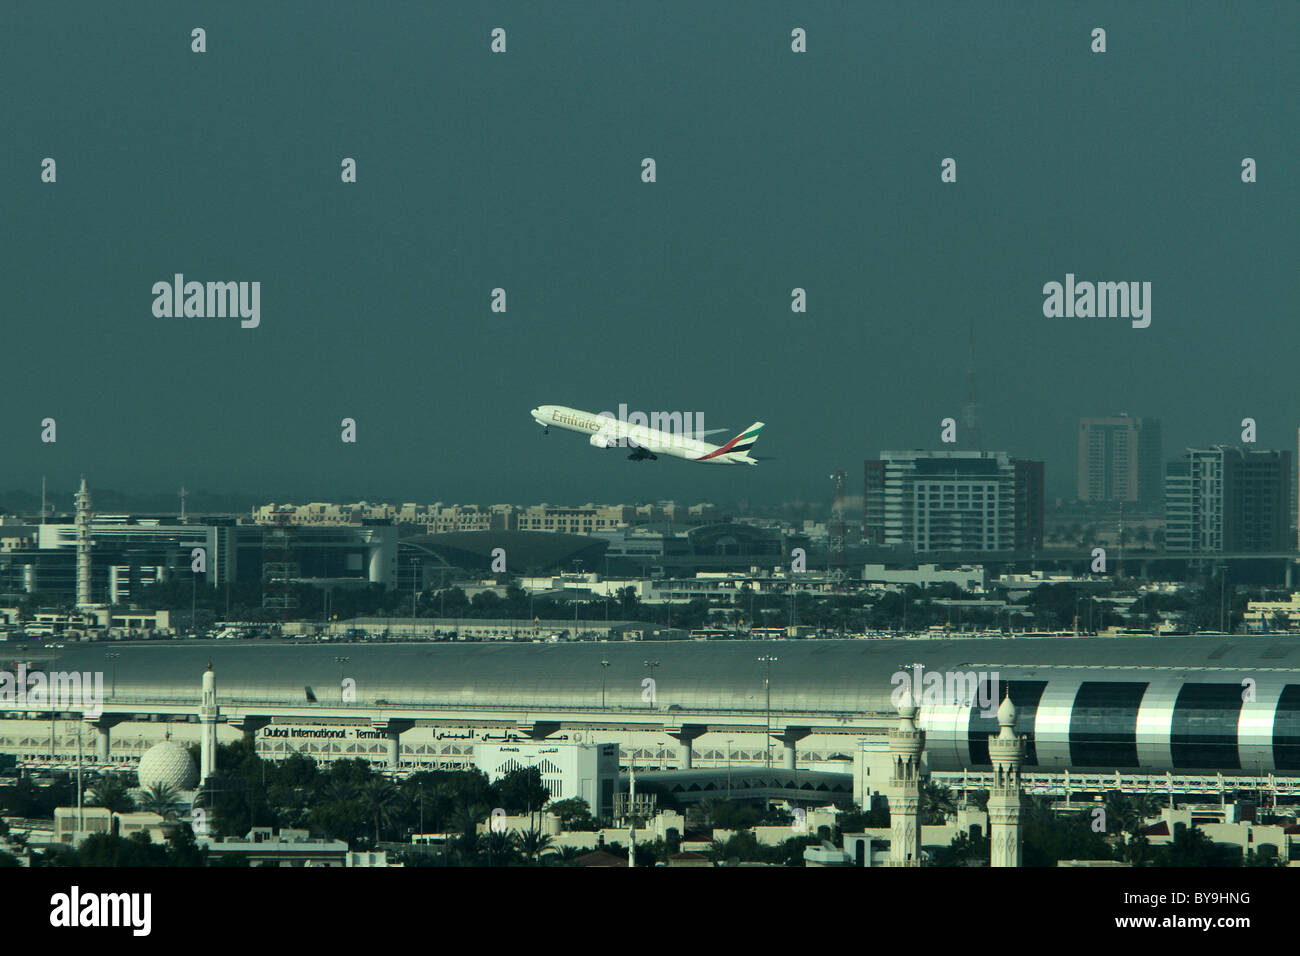 A plane takes off from Dubai's new International Airport terminal Stock Photo